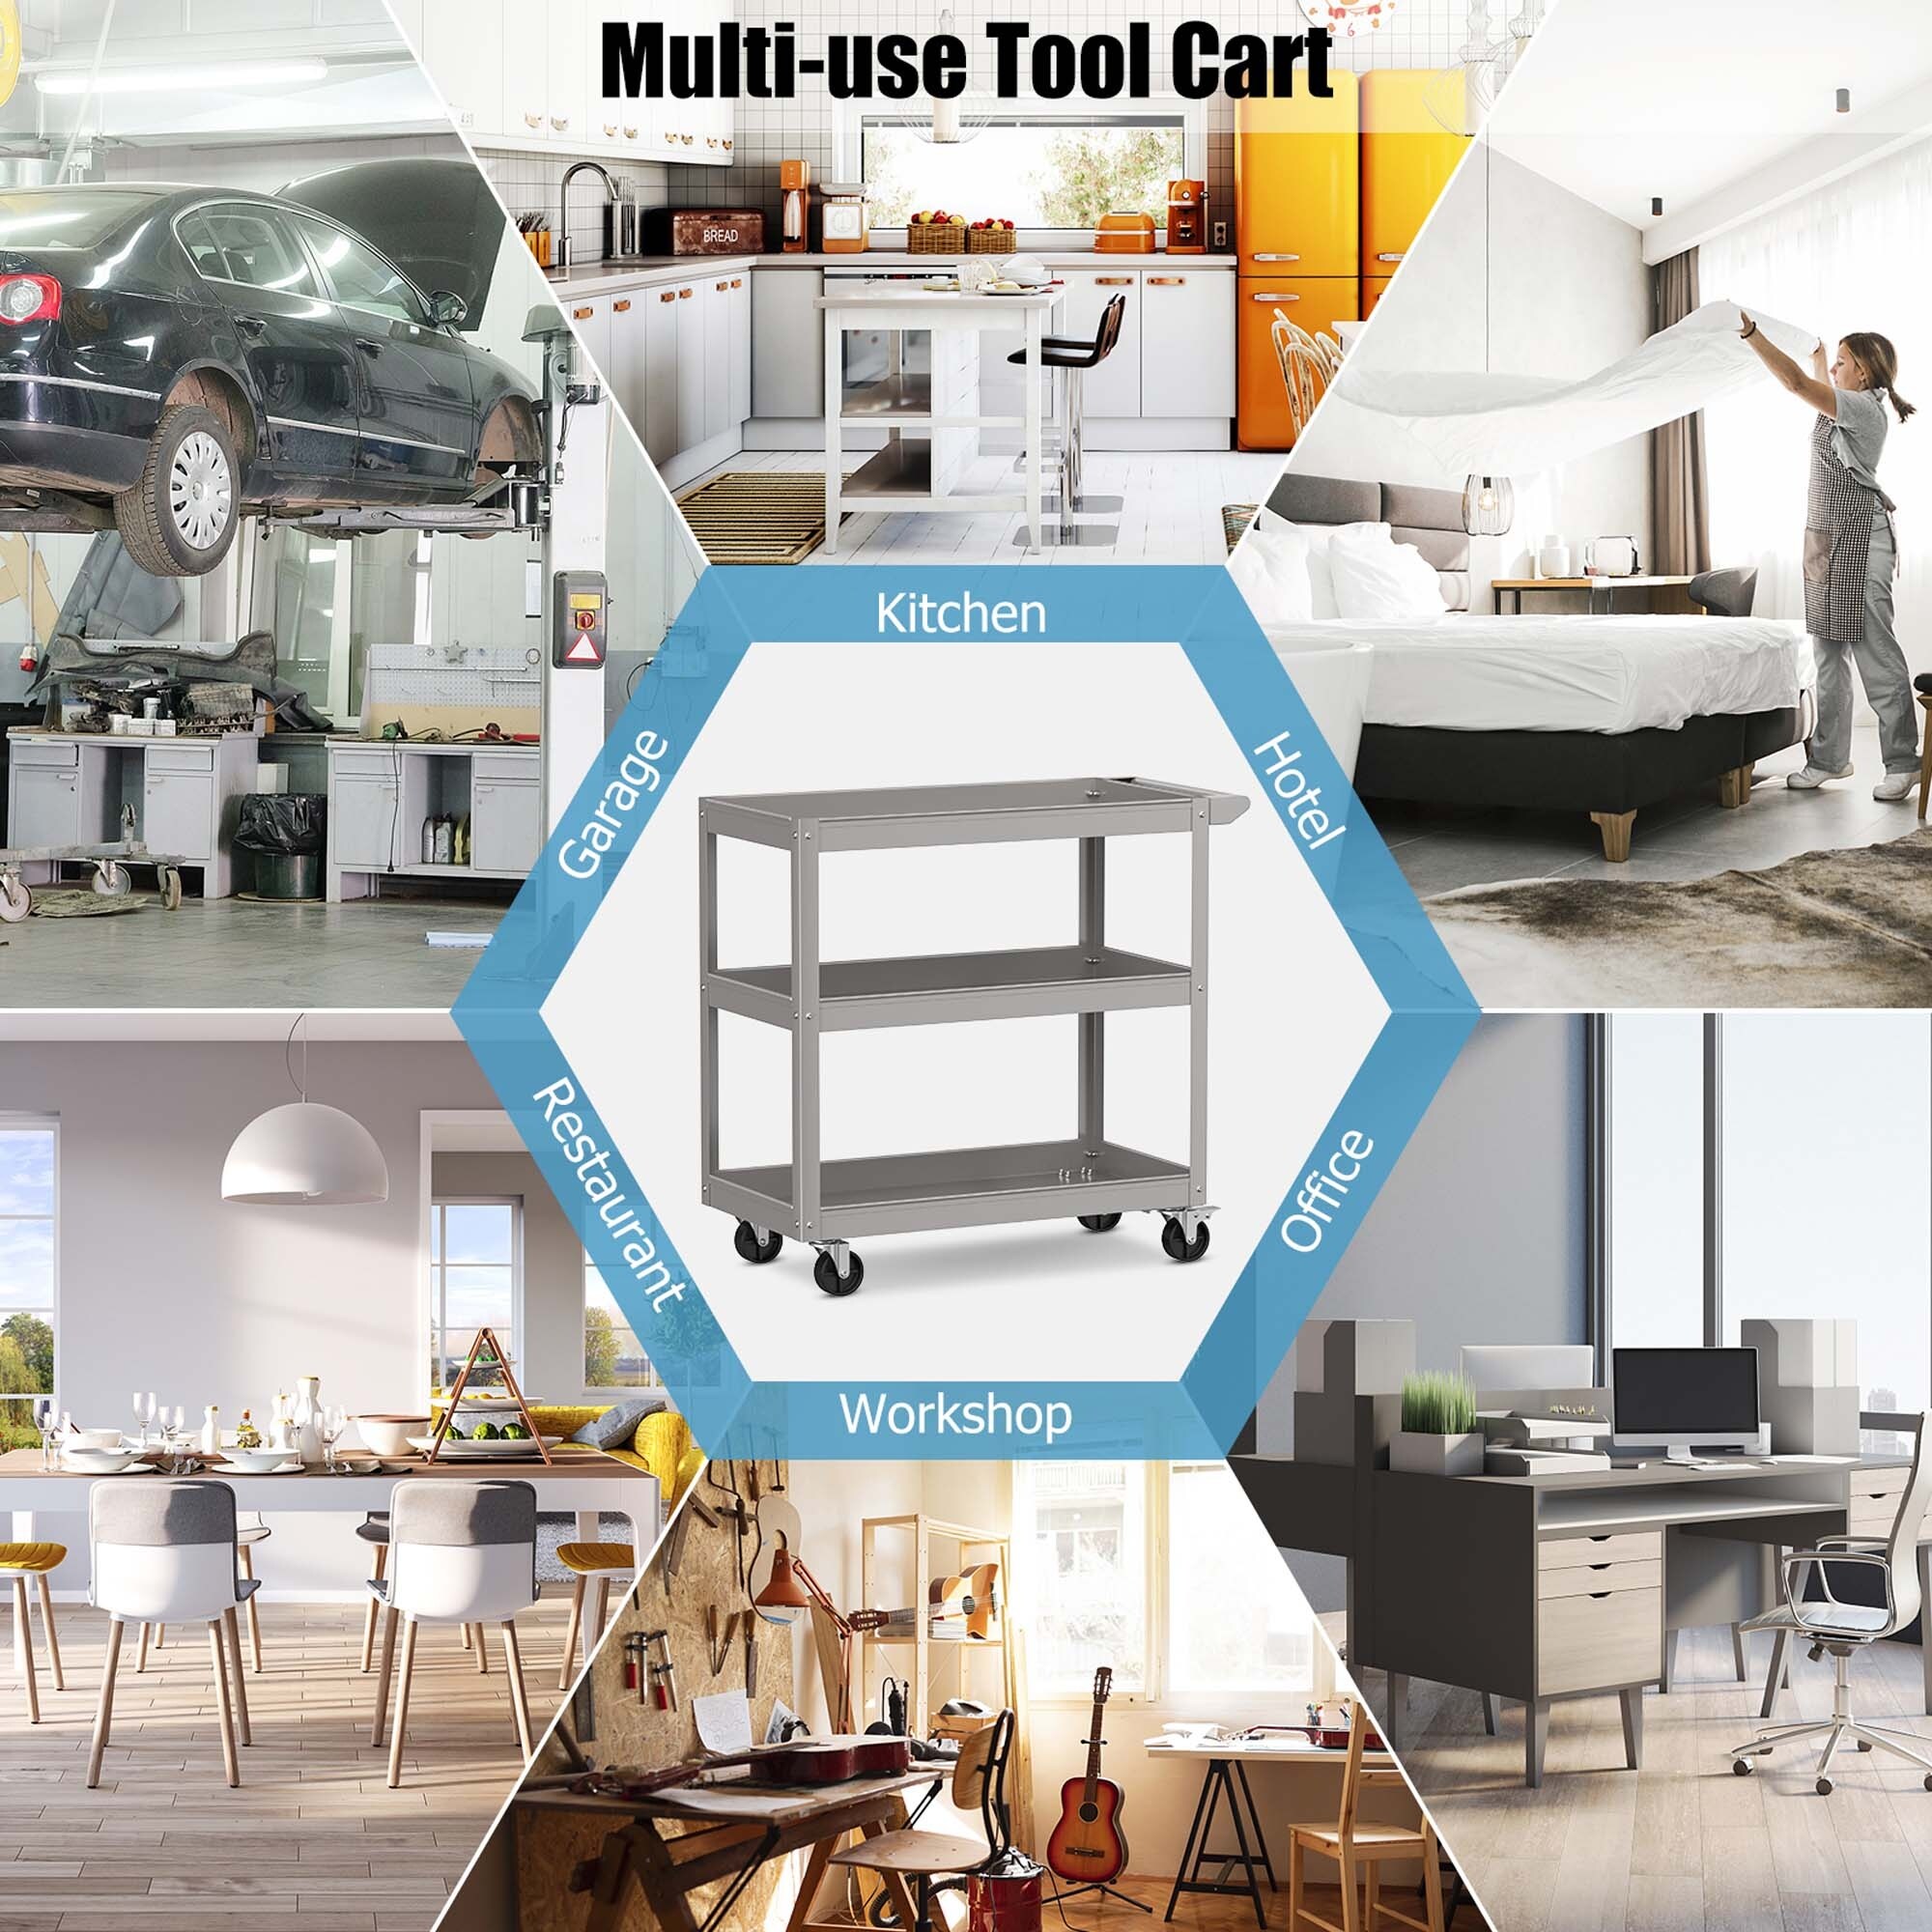 https://ak1.ostkcdn.com/images/products/is/images/direct/0c145daf4018076a7394666a38e4fb5e41afbd06/Costway-3-Tier-Metal-Utility-Cart-400-lbs-Storage-Service-Trolley-Tool.jpg